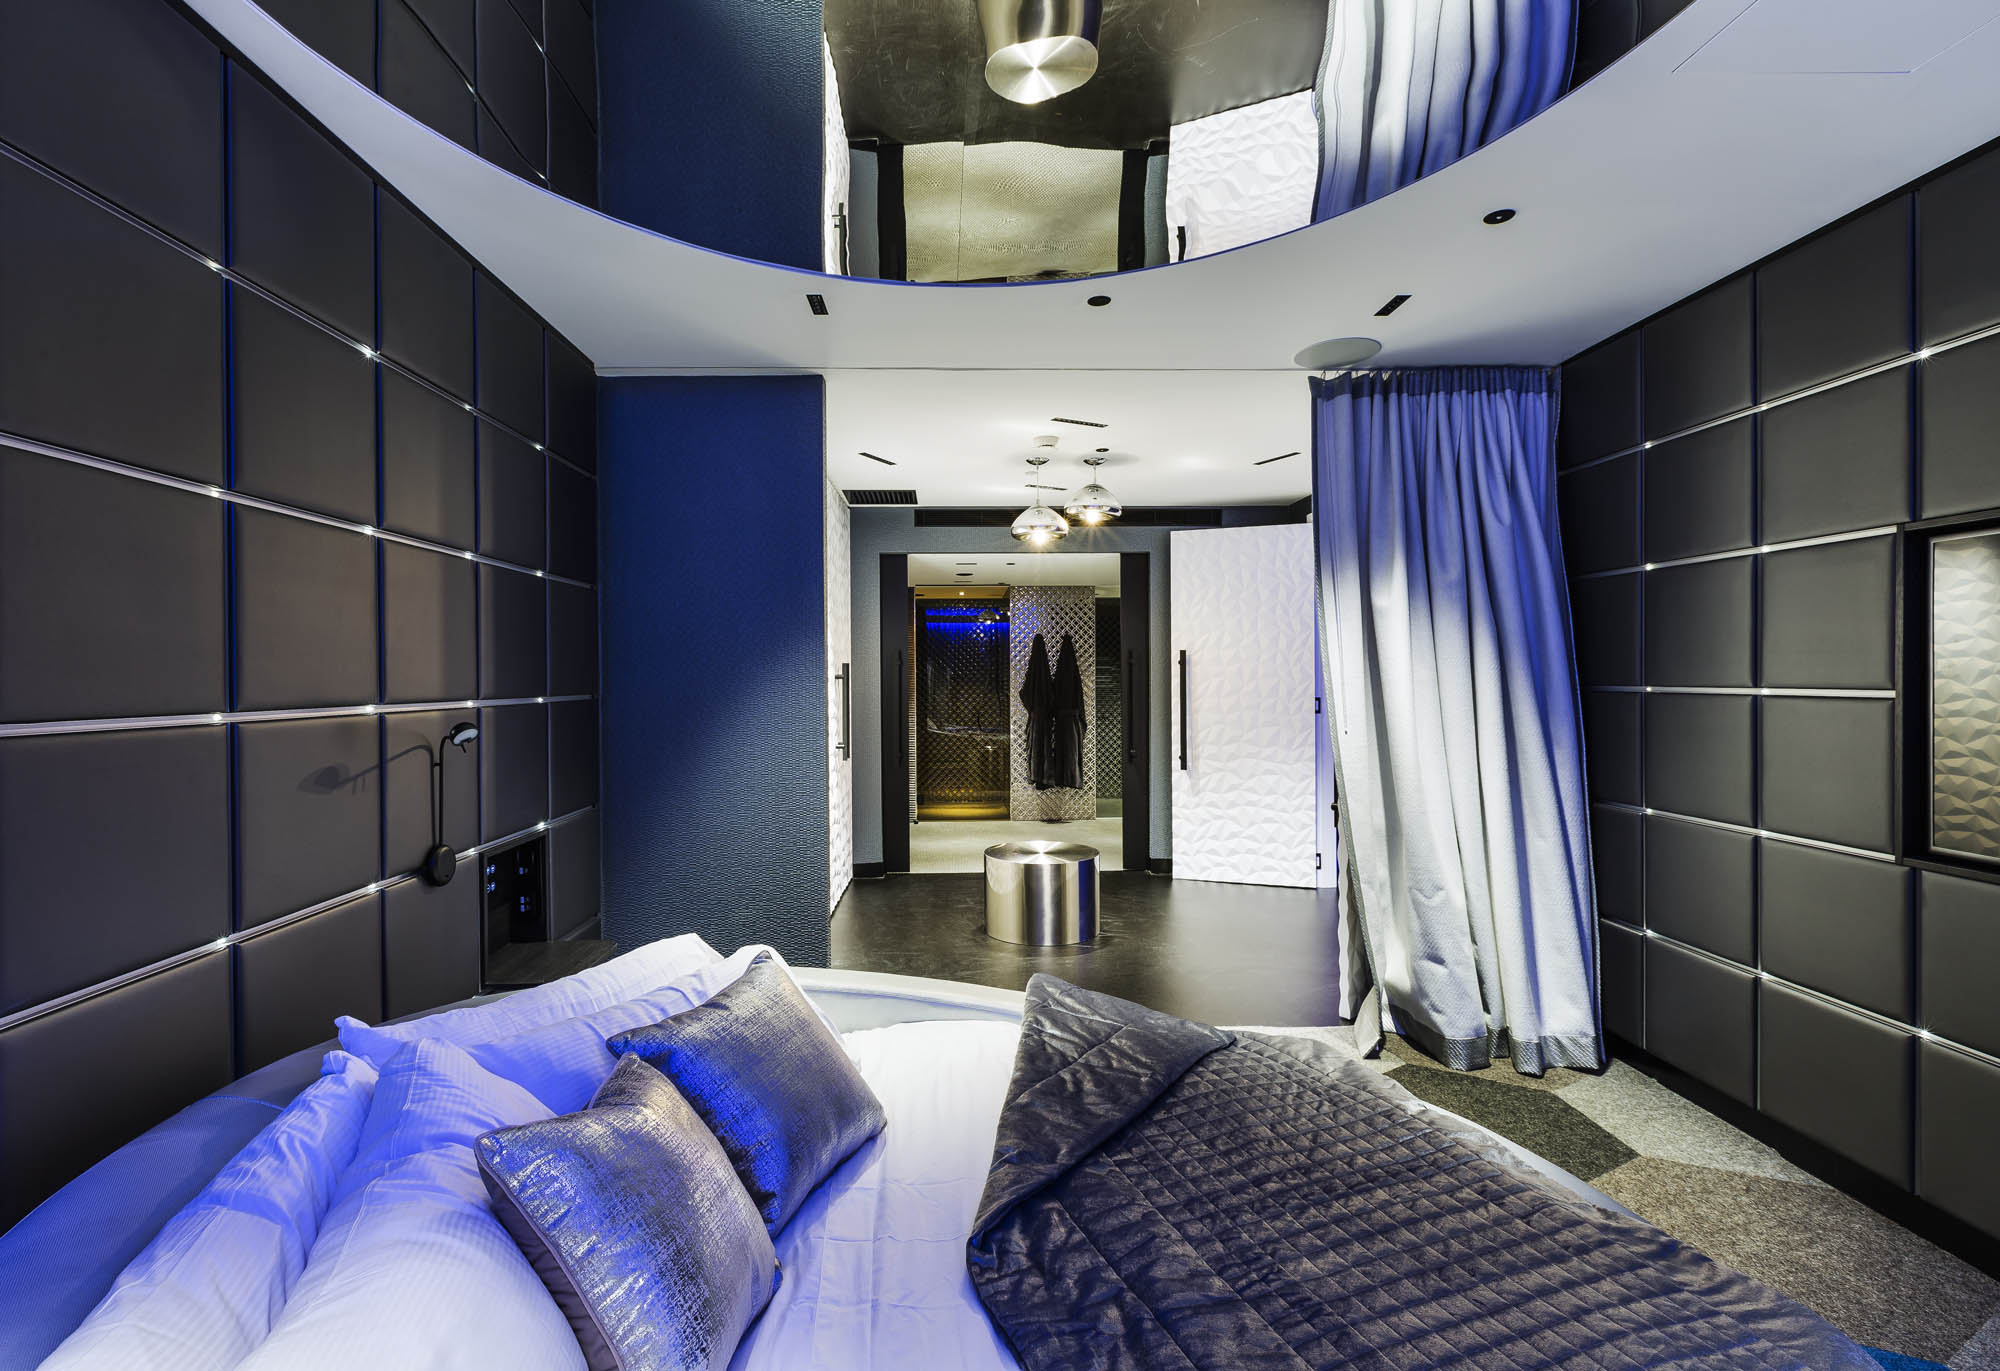 studios at the star sydney hotels design and construct nsw cyberpunk room grey walls blue lighting round bed metallic